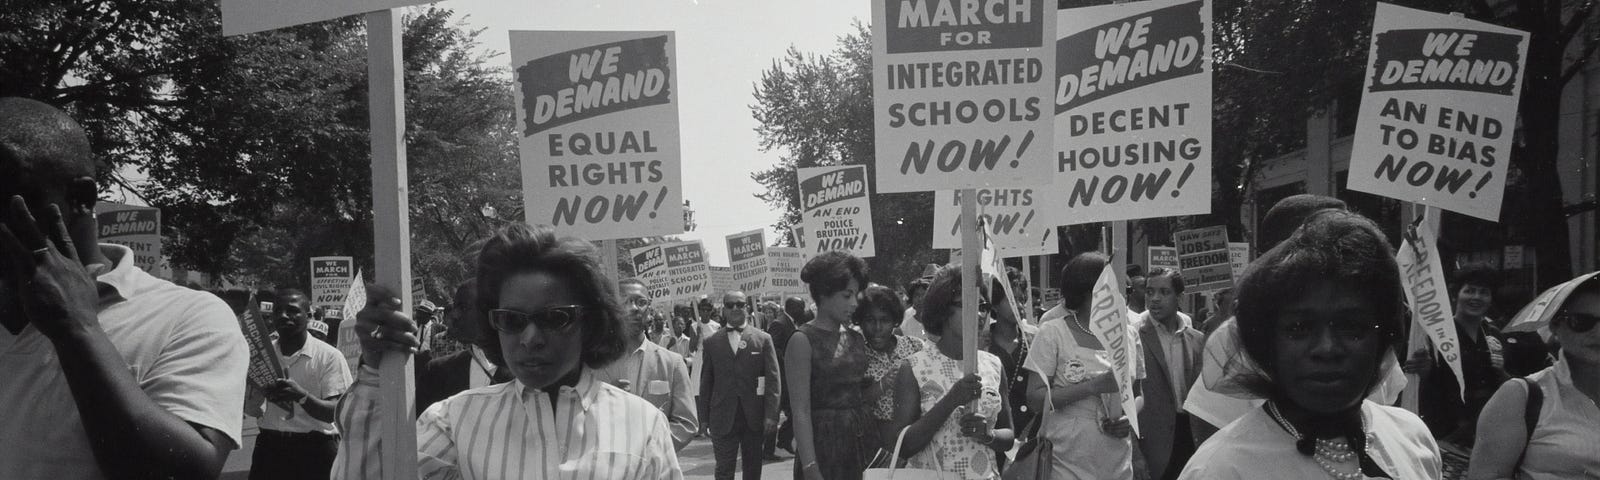 This is a black and white photo of a march against racism that seems to be from the 1950s or 1960s.